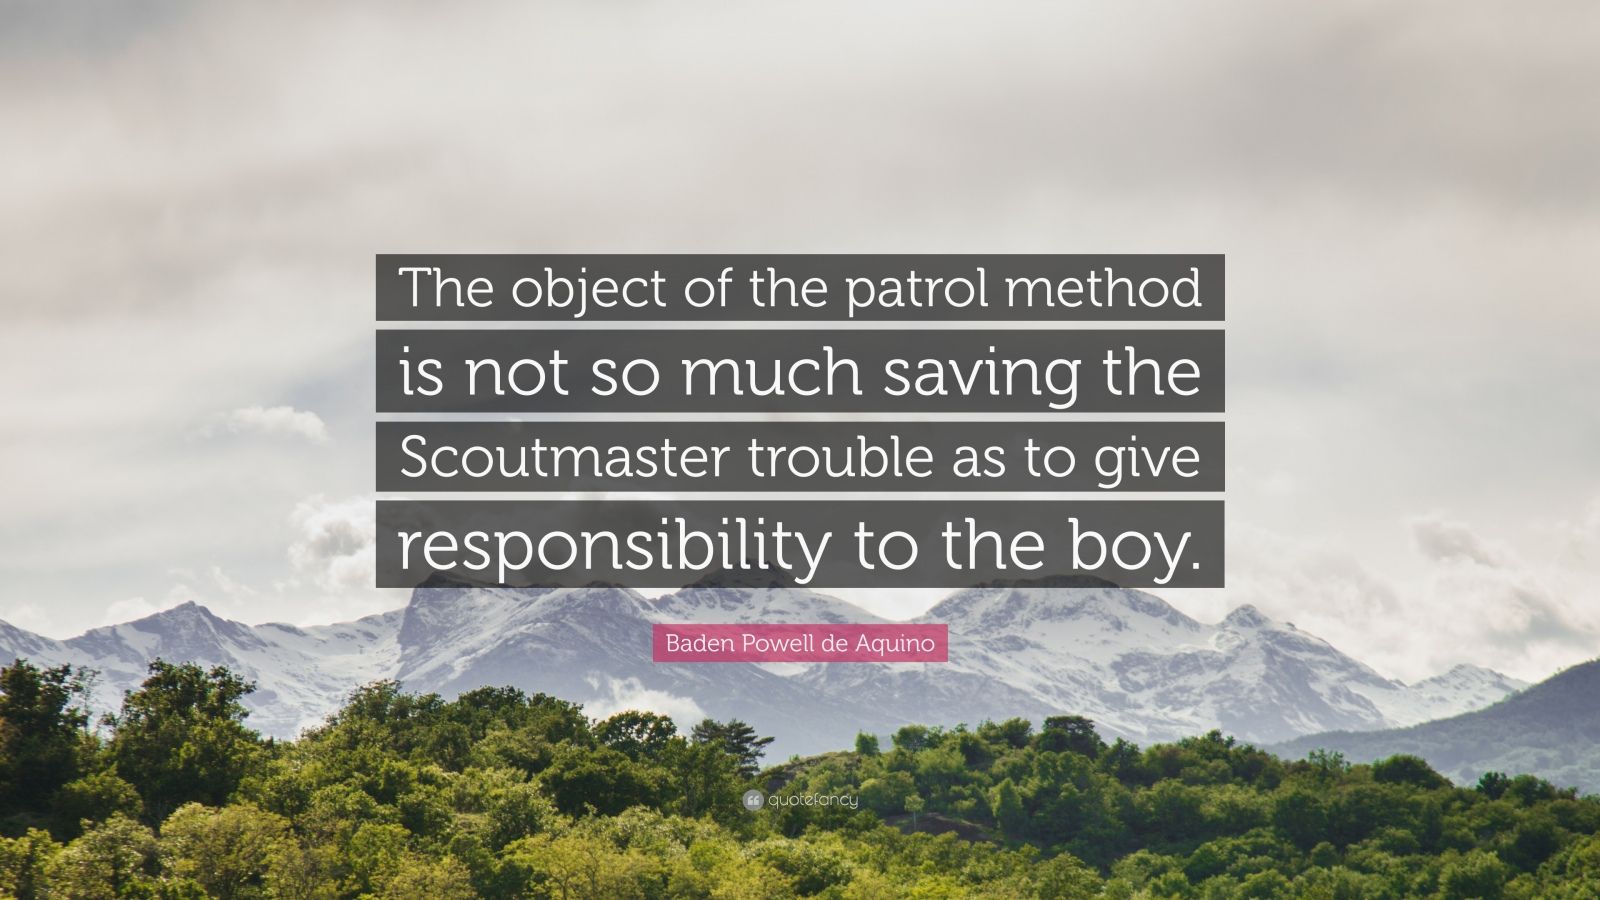 Baden Powell De Aquino Quote: “The Object Of The Patrol Method Is Not So Much Saving The Scoutmaster Trouble As To Give Responsibility To The Boy.”